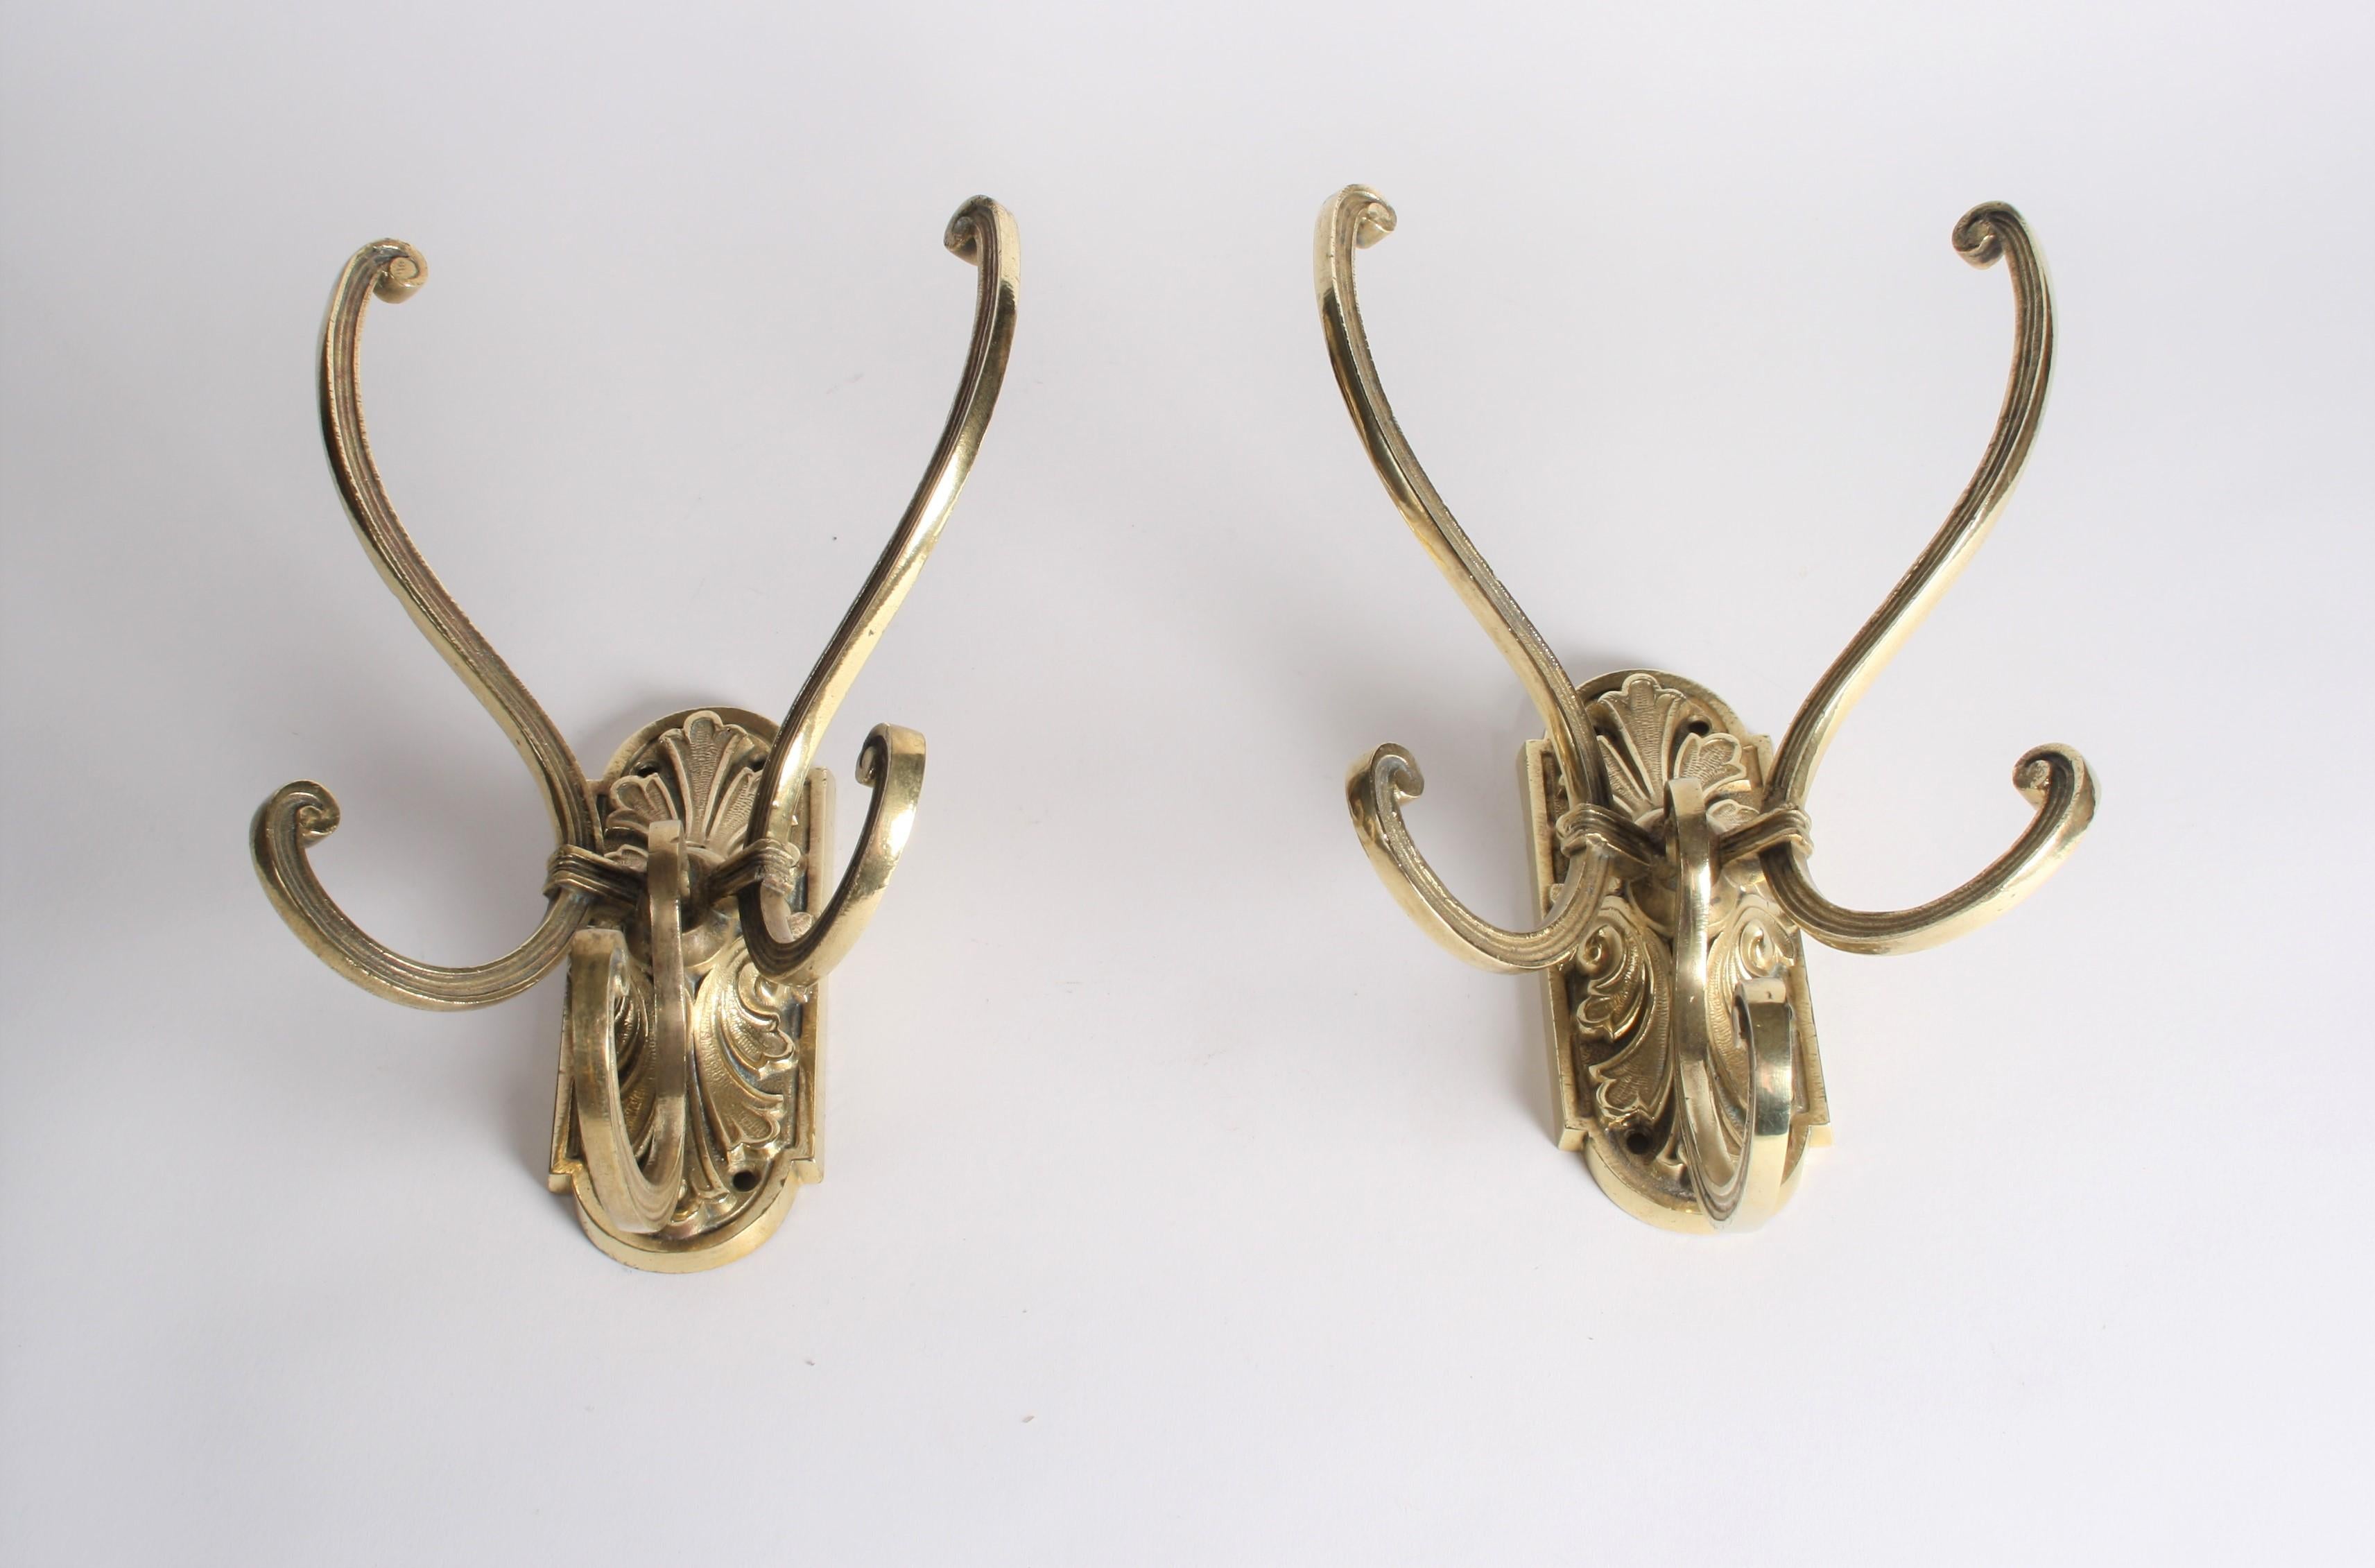 A pair of good quality brass triple hat and coat hooks with acanthus motif back plates.